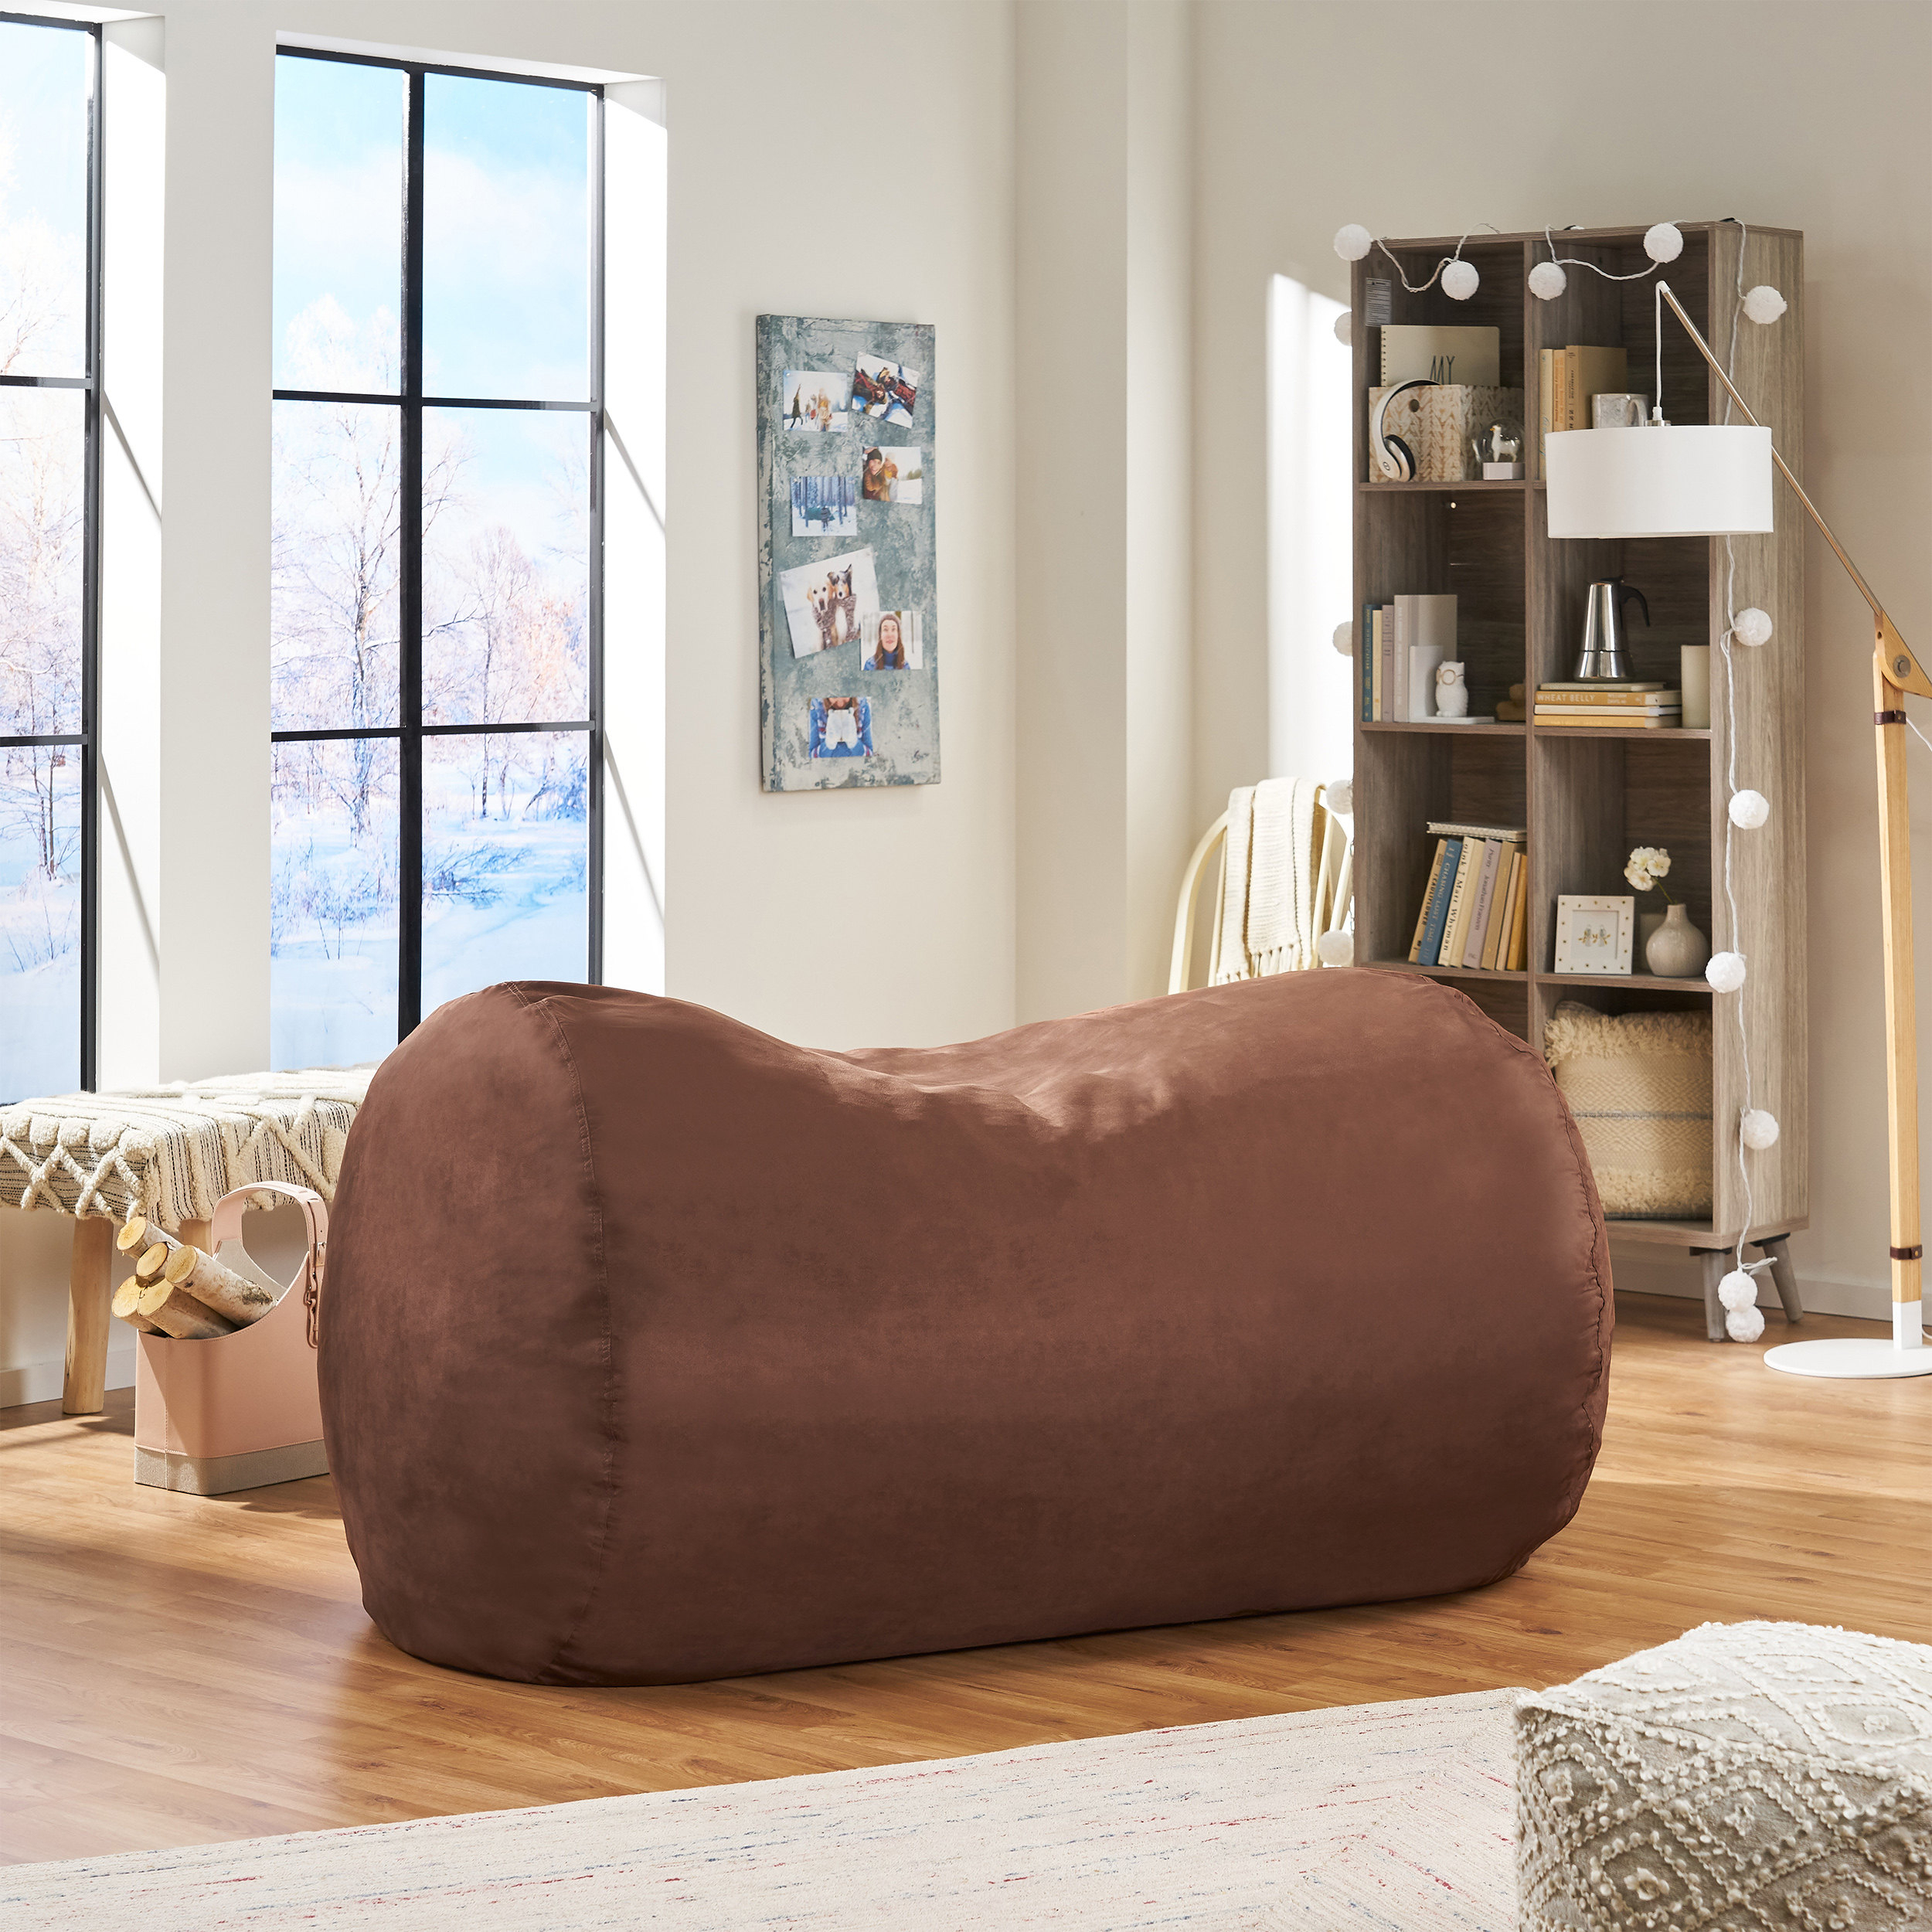 Wanda Traditional 8 Foot Suede Bean Bag (Cover Only), Tuscany - French Roast